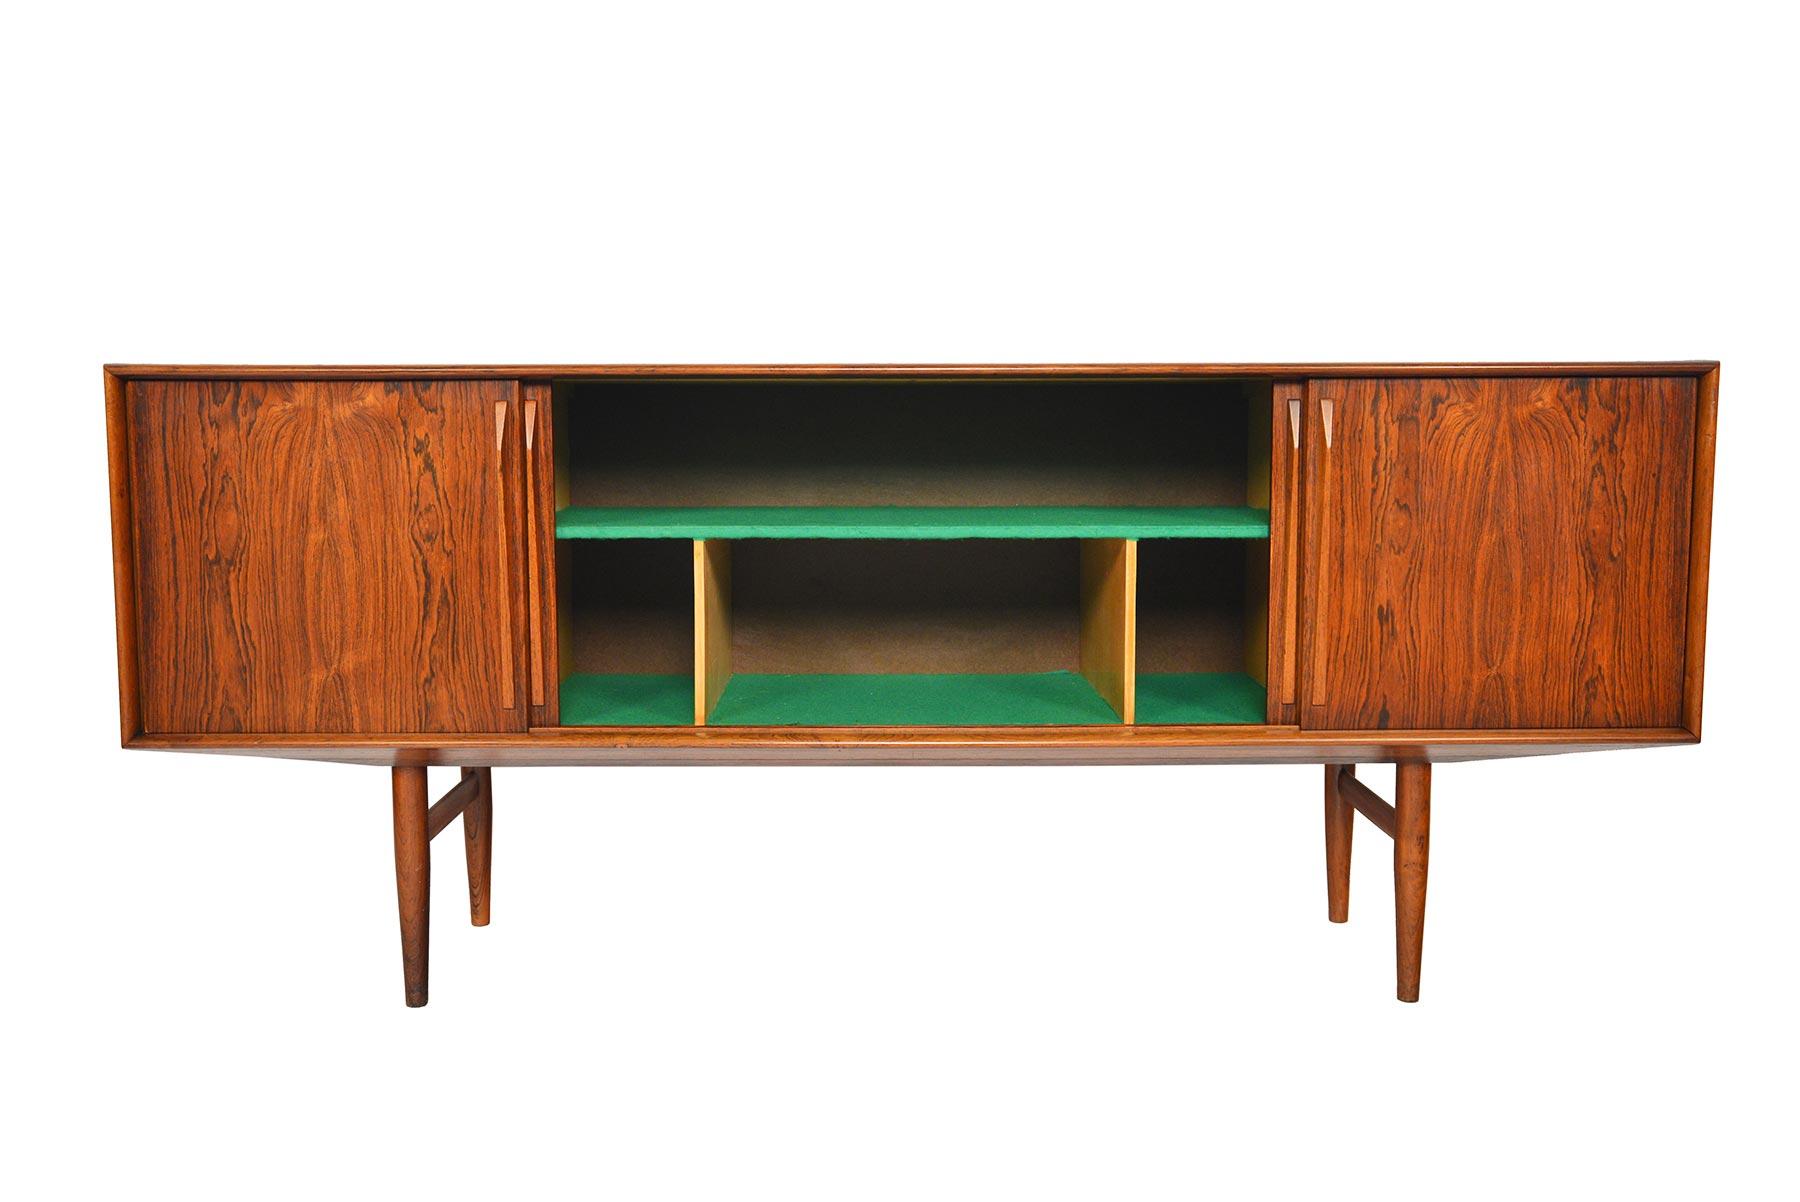 Beautifully crafted in Brazilian rosewood, this large credenza was designed by Kurt Østerving for KP Mobler in the 1960s. Four sliding doors open to reveal three bays. The left bay is outfitted with five drawers, the center bay offers fixed